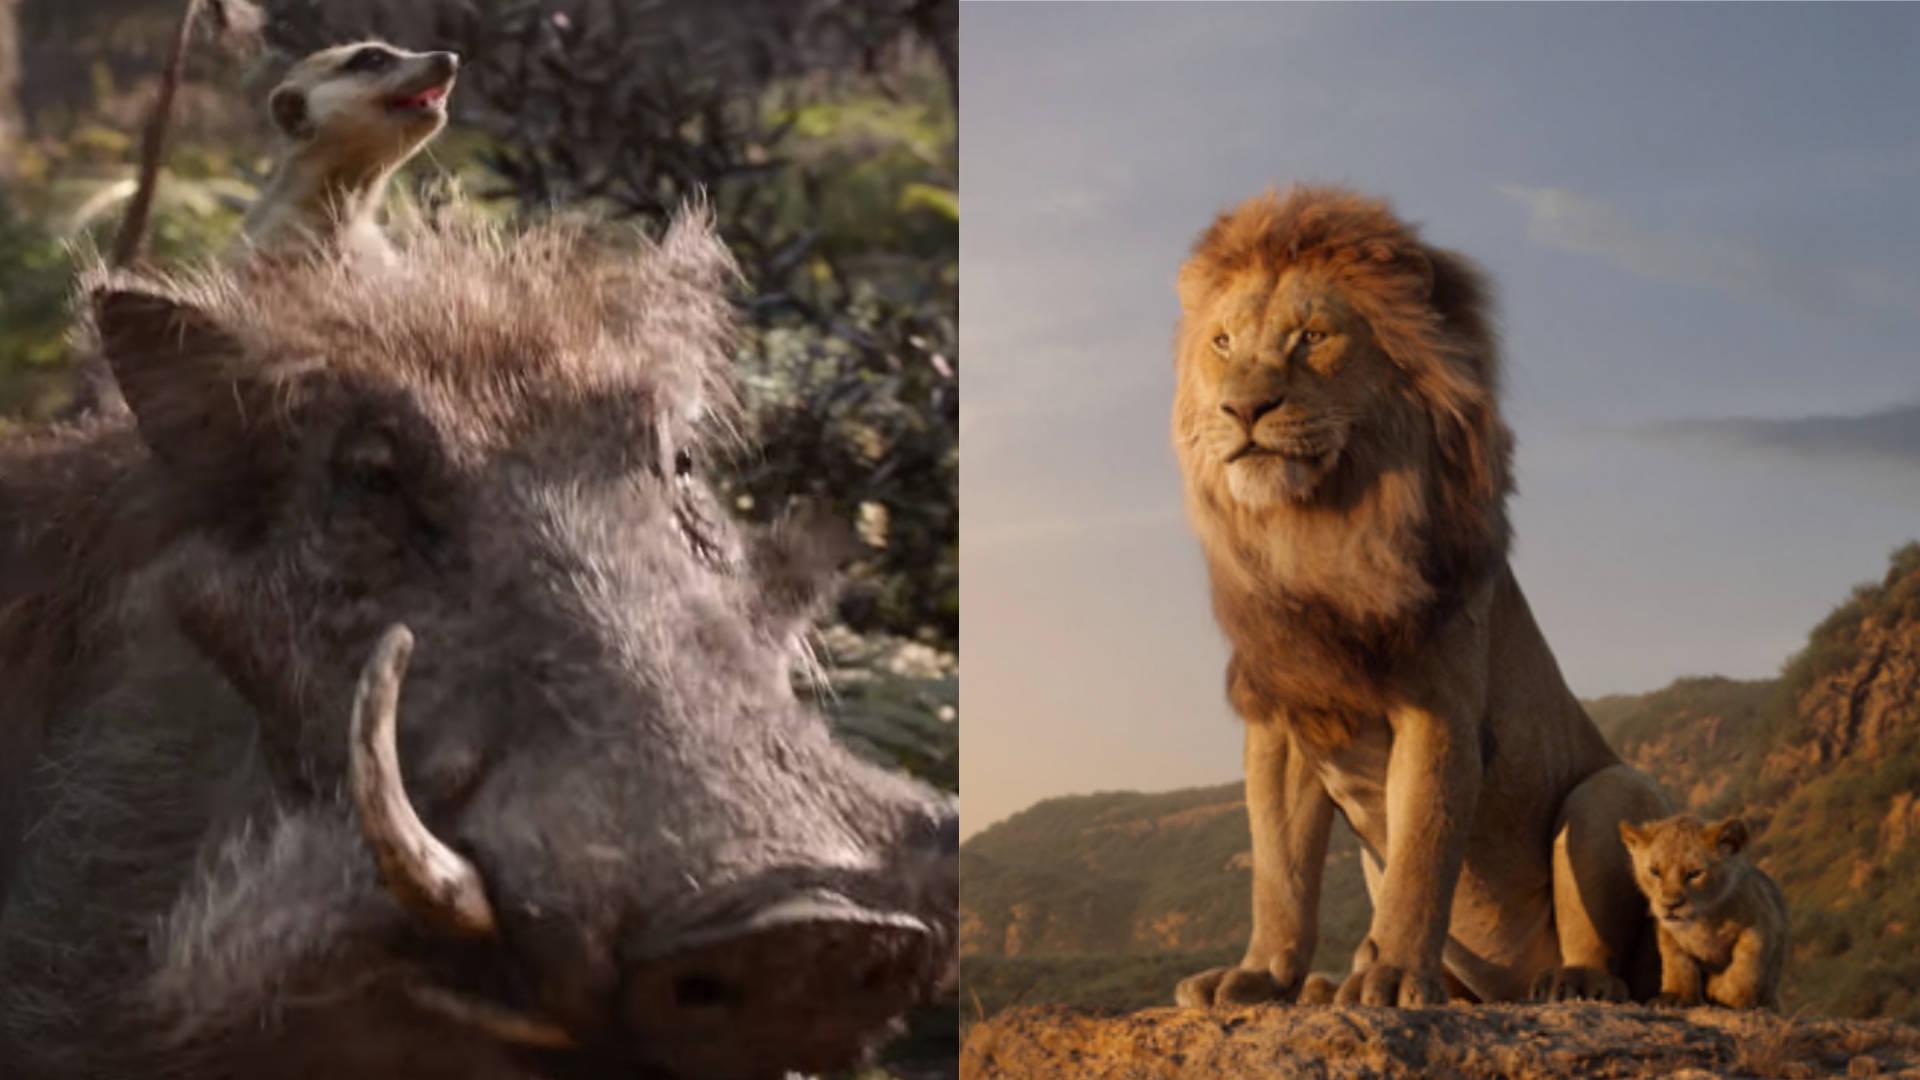 The Lion King trailer: Watch the stunning new trailer showing Mufasa